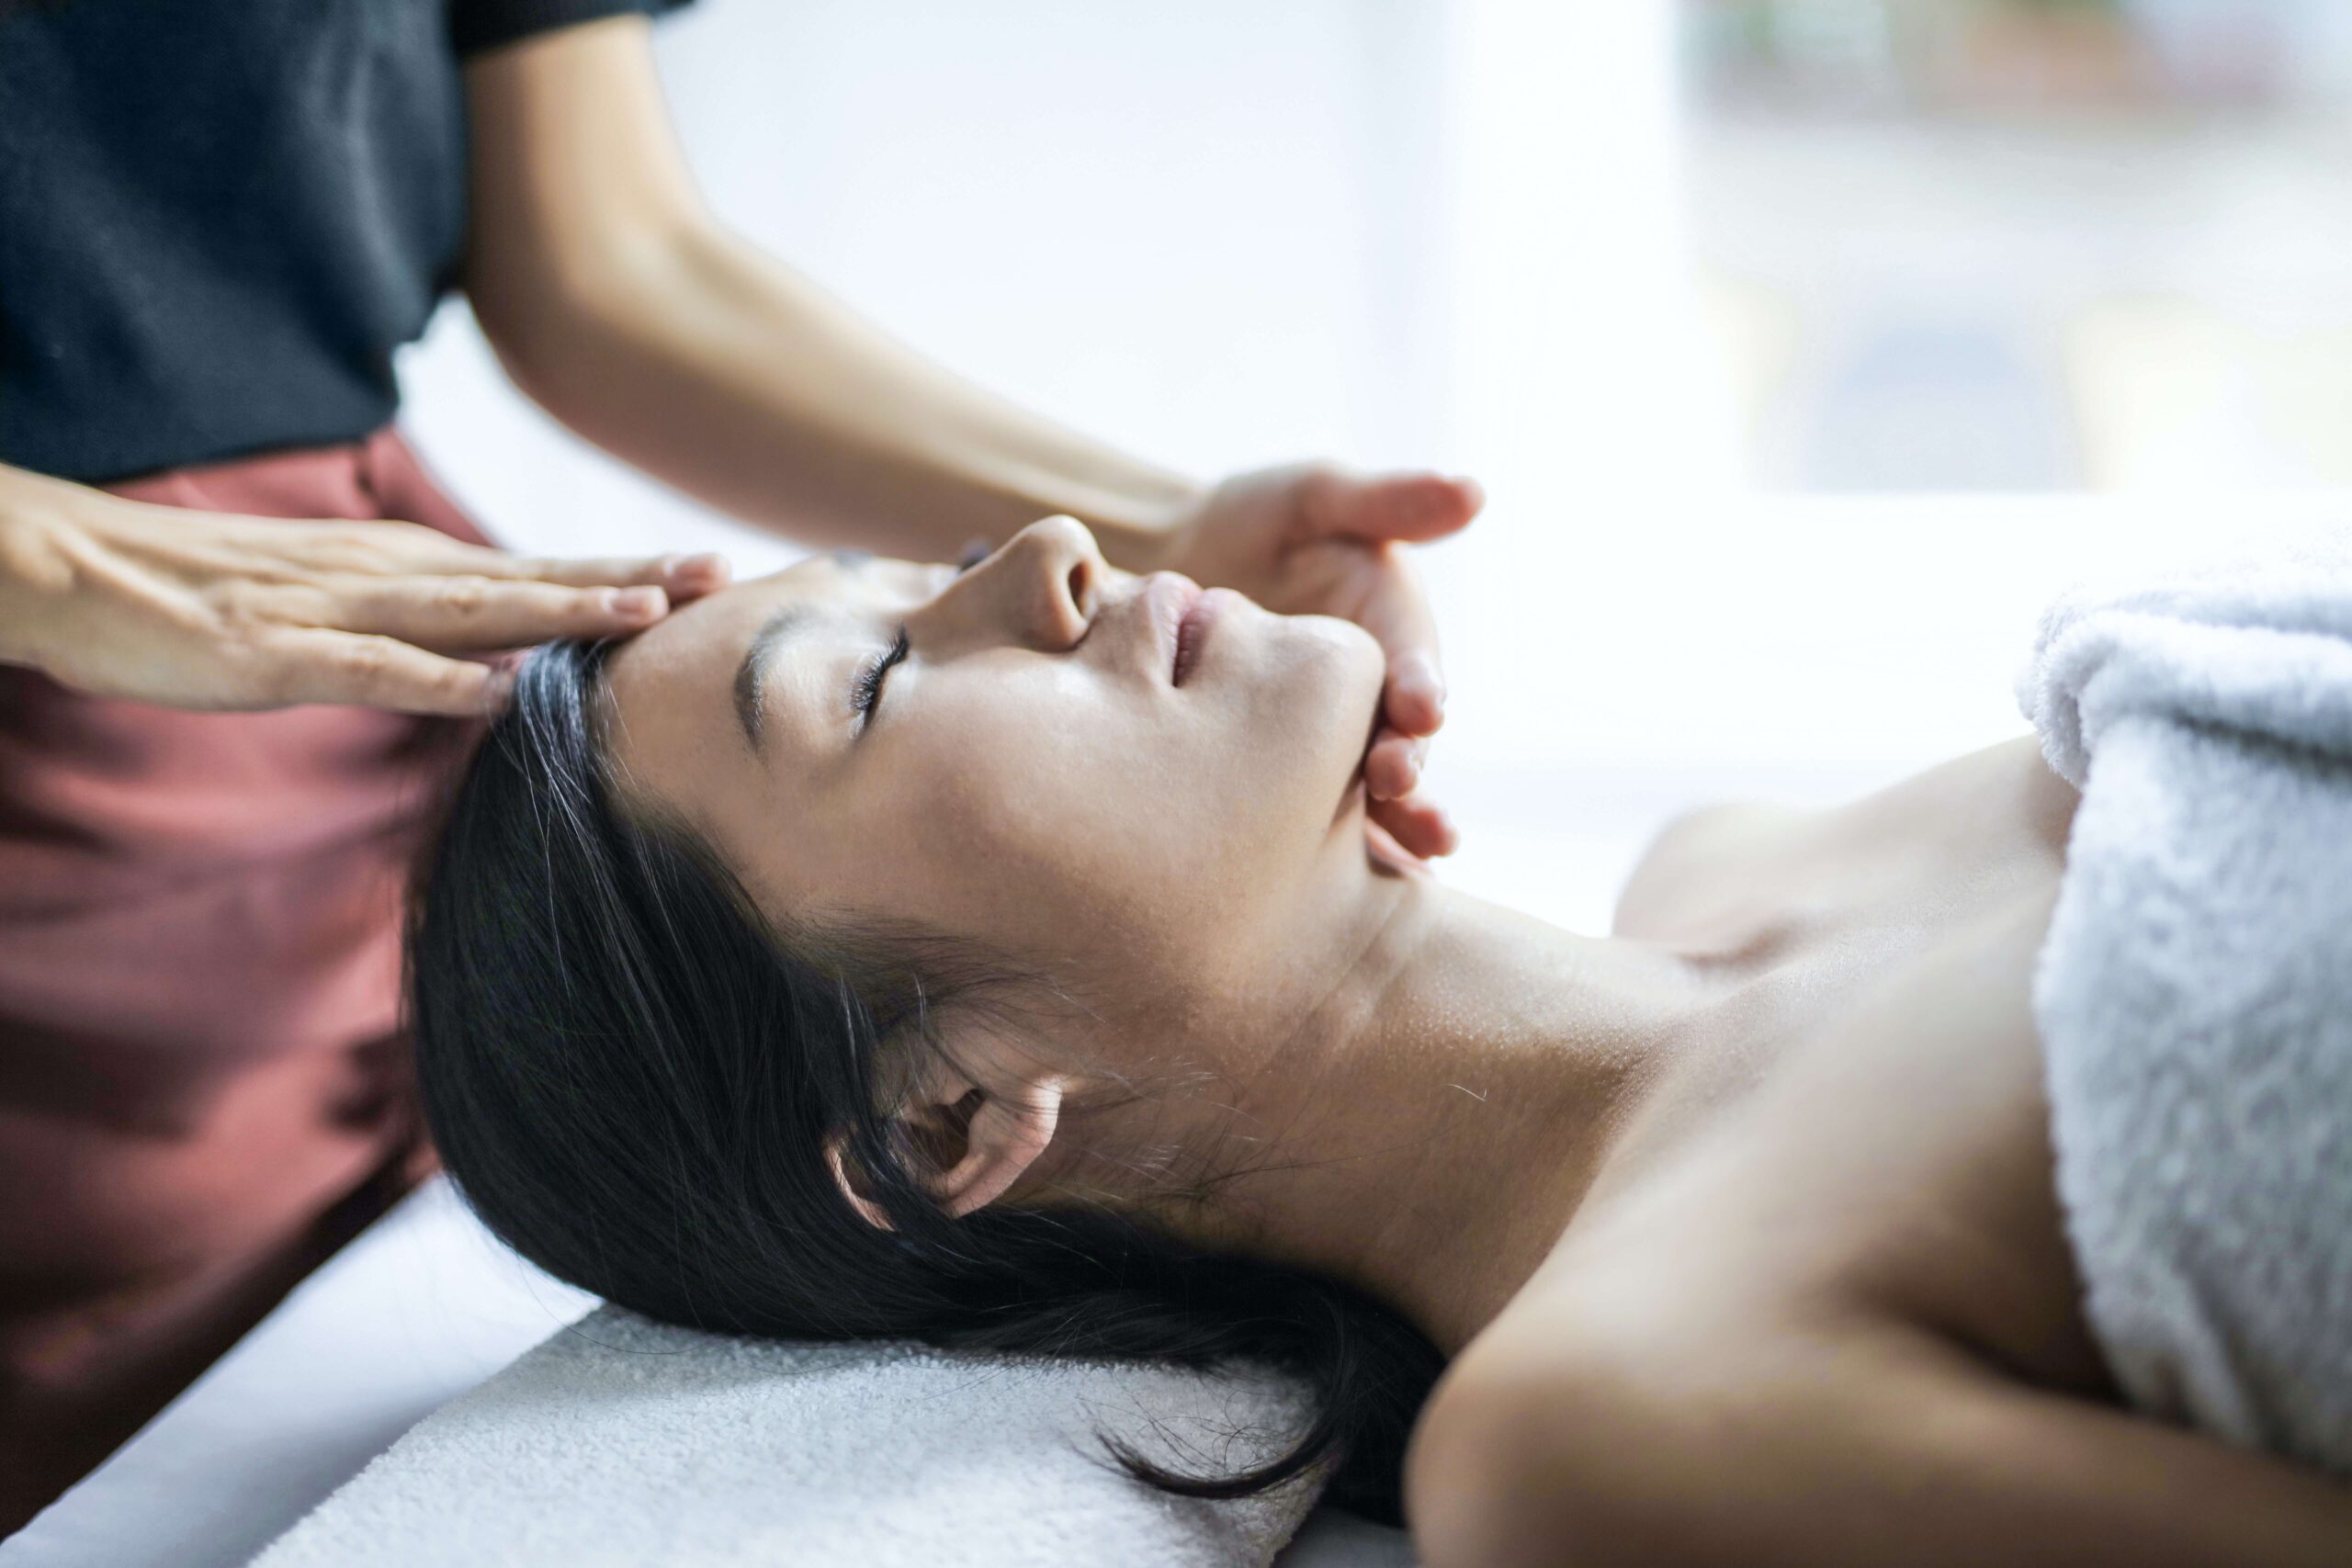 IAP Spa Owner Course & Certification Review 2023: Is It the Best?